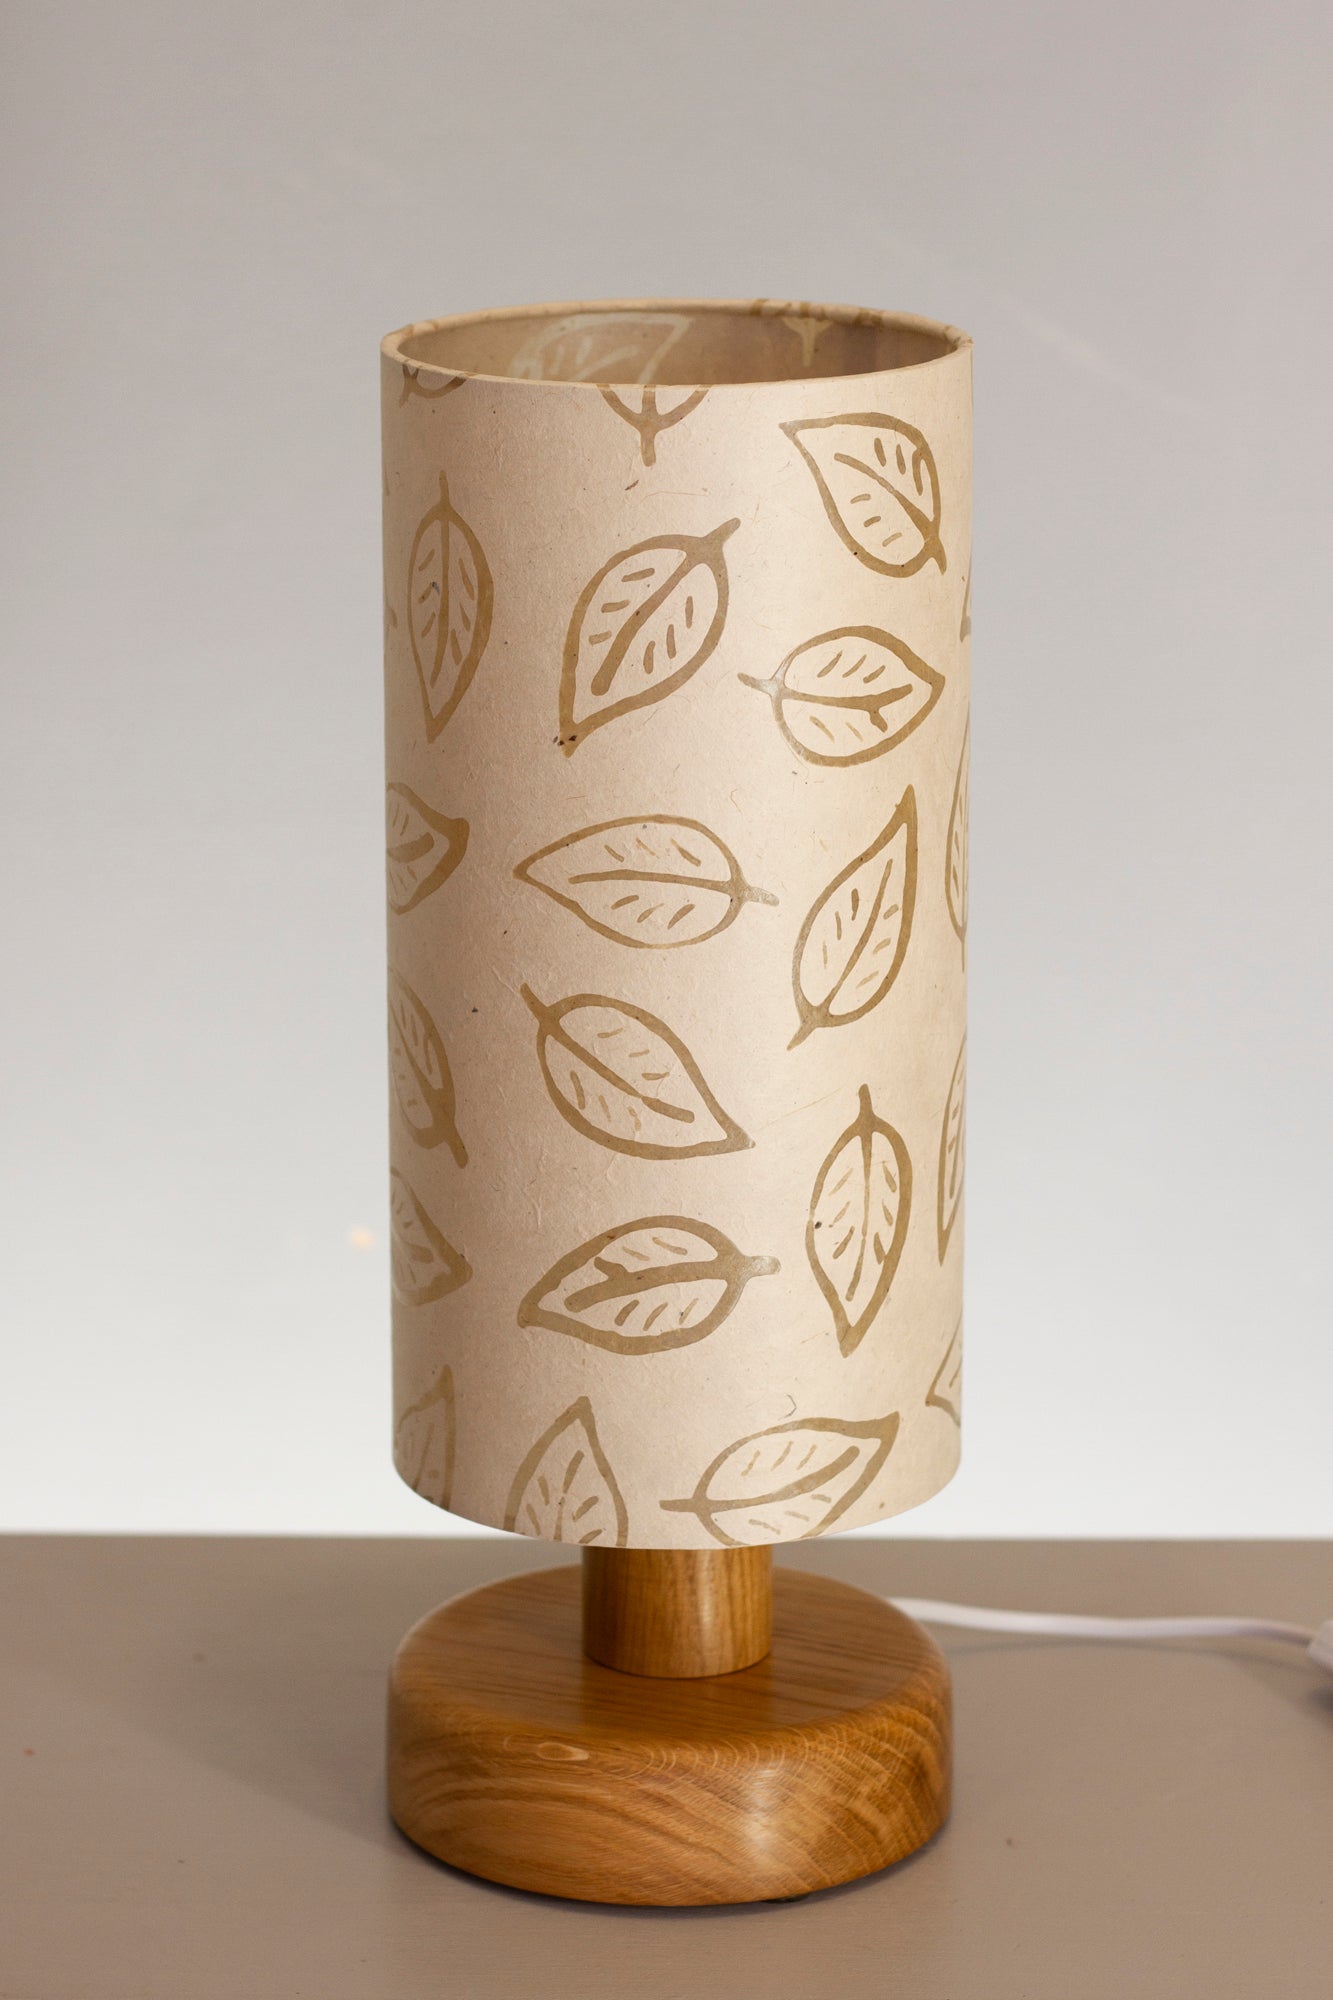 Round Oak Table Lamp with 15cm x 30cm Lamp Shade in (P28) Batik Leaf on Natural